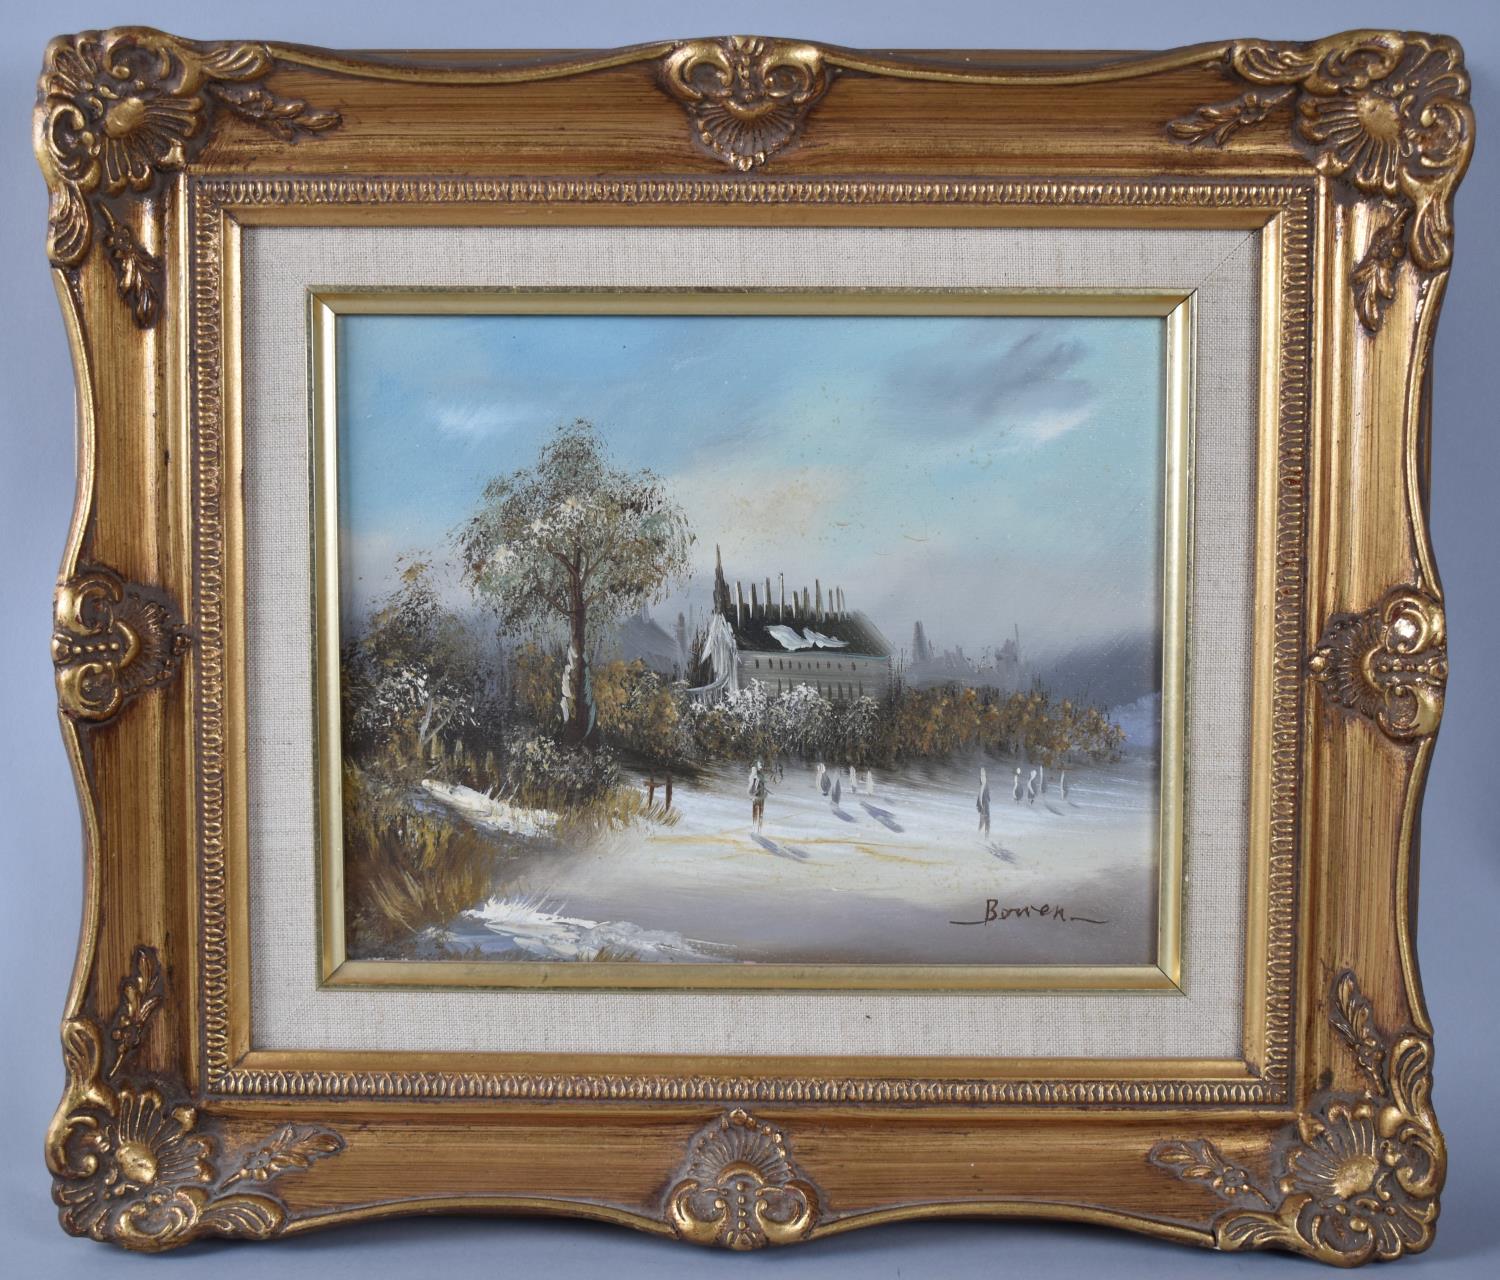 A Git Framed Oil on Canvas Depicting Figures in Front of Church